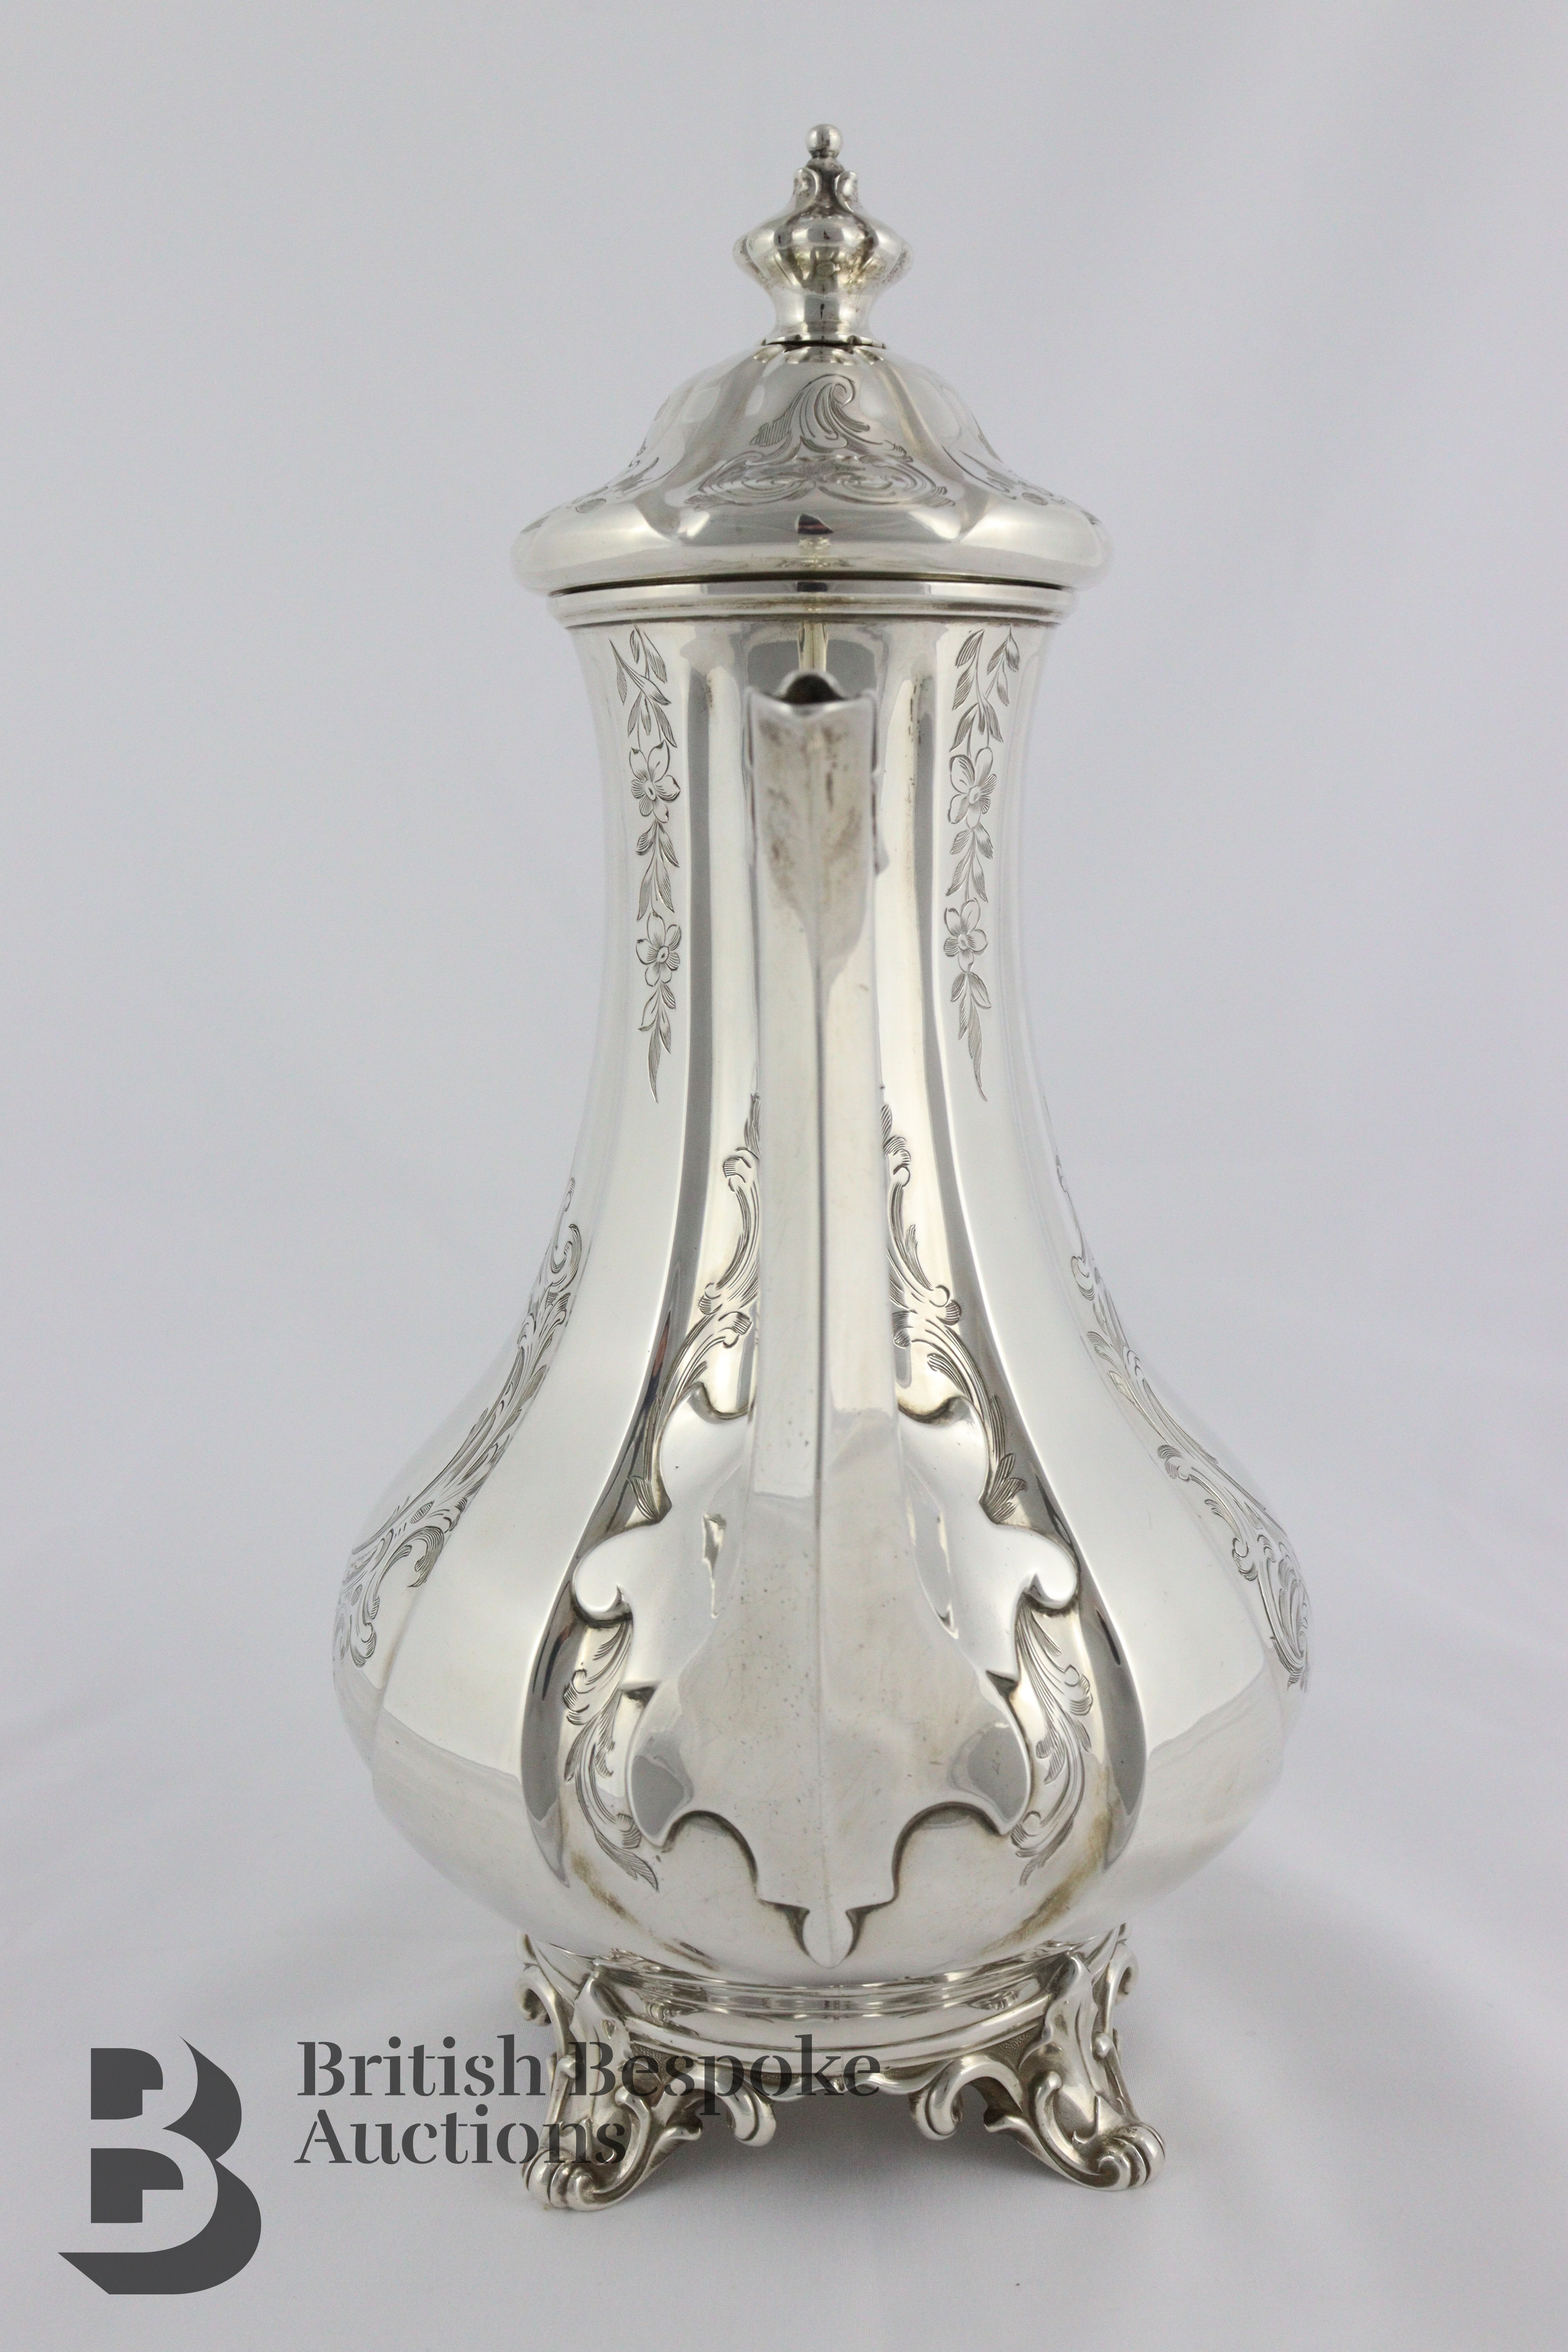 Victorian Silver Coffee Pot - Image 3 of 8